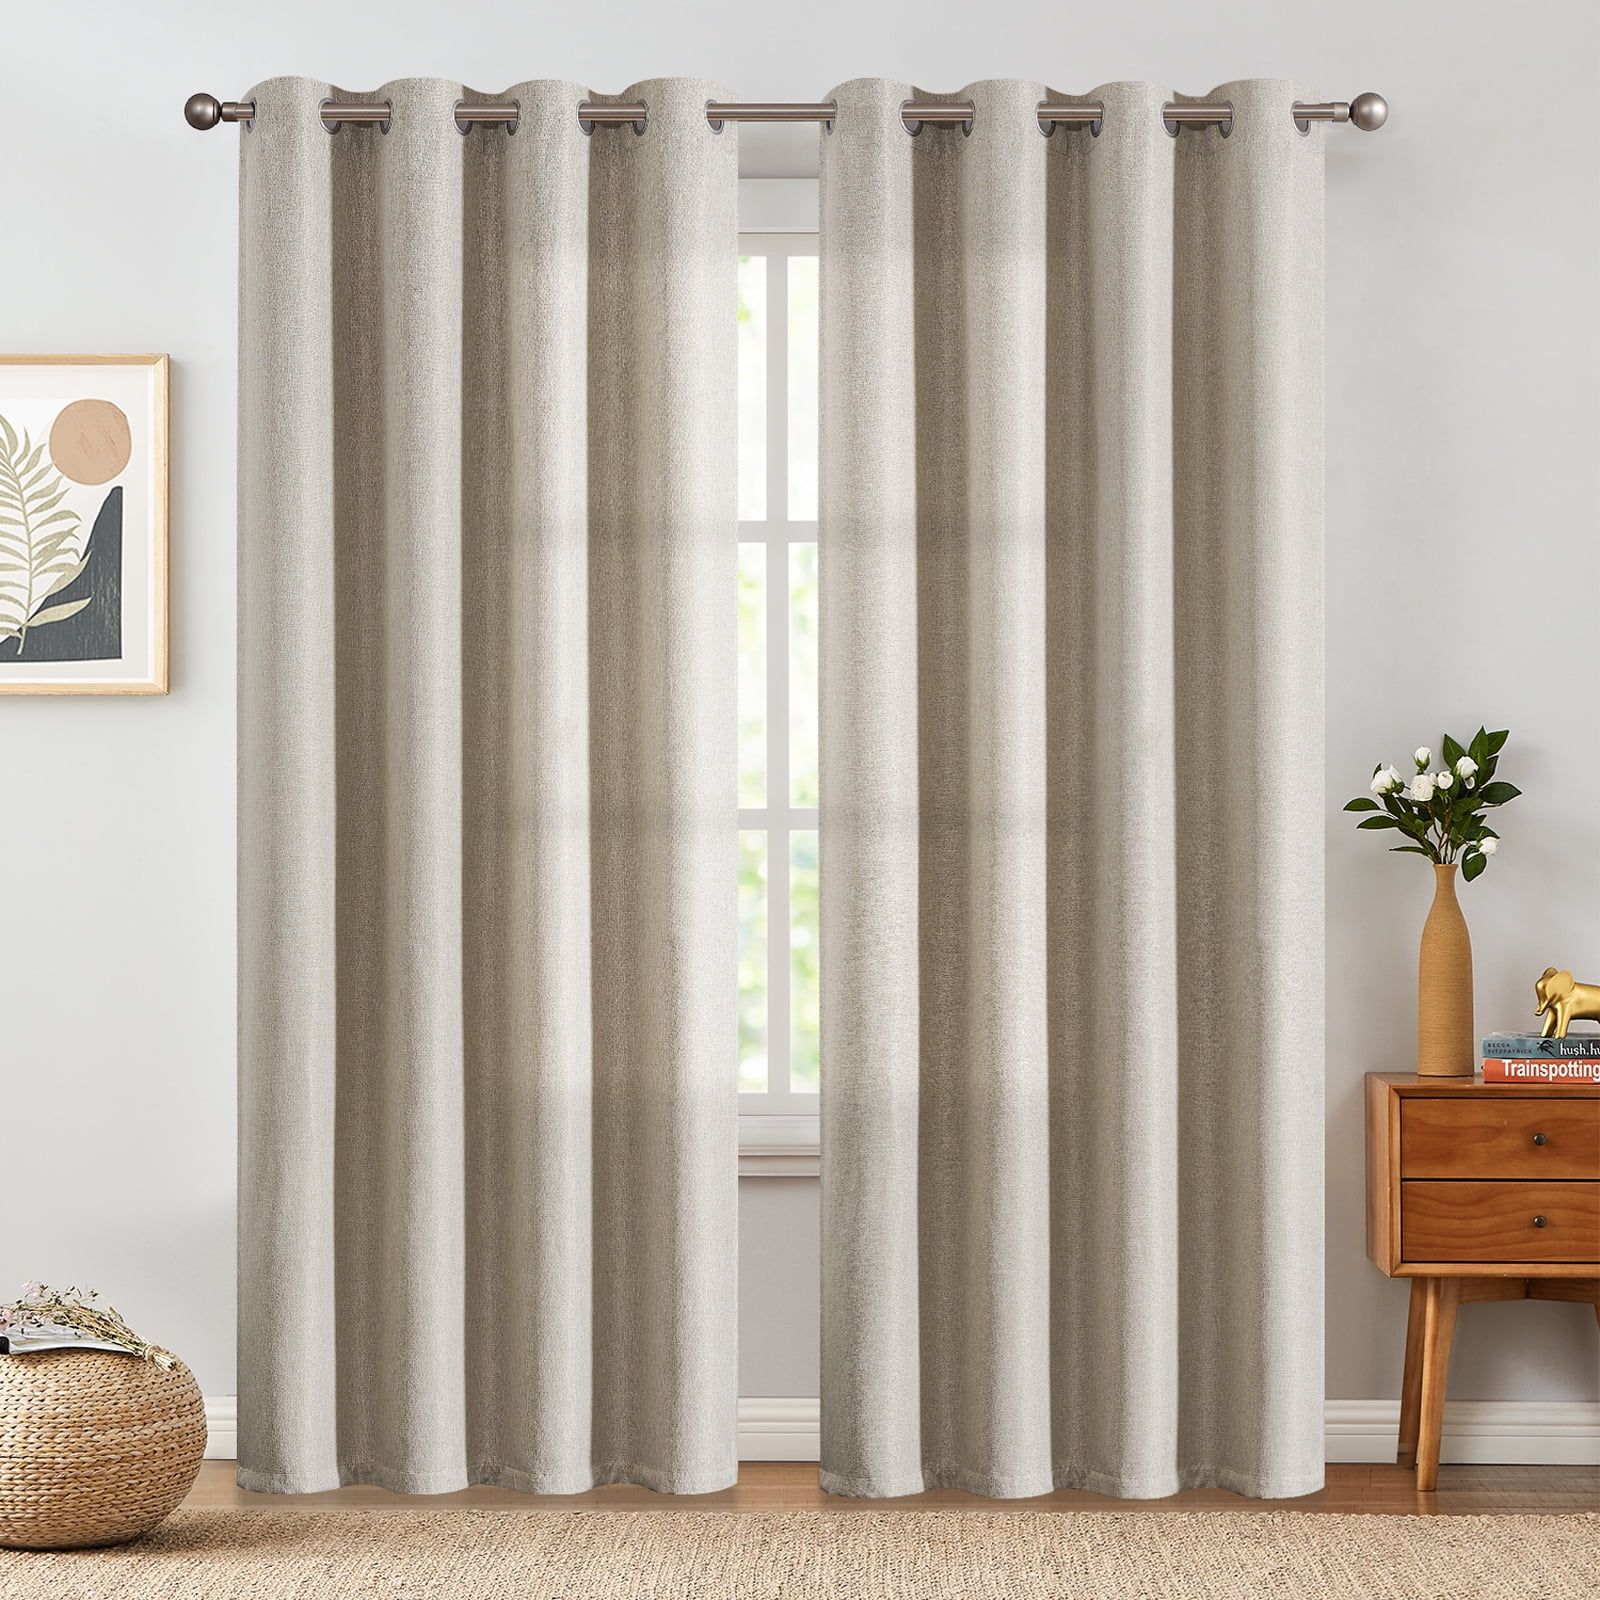 Curtainking Room Darkening Curtains 84 inches Greyish Beige Faux Linen Curtains Bedroom Living Ro... | Walmart (US)